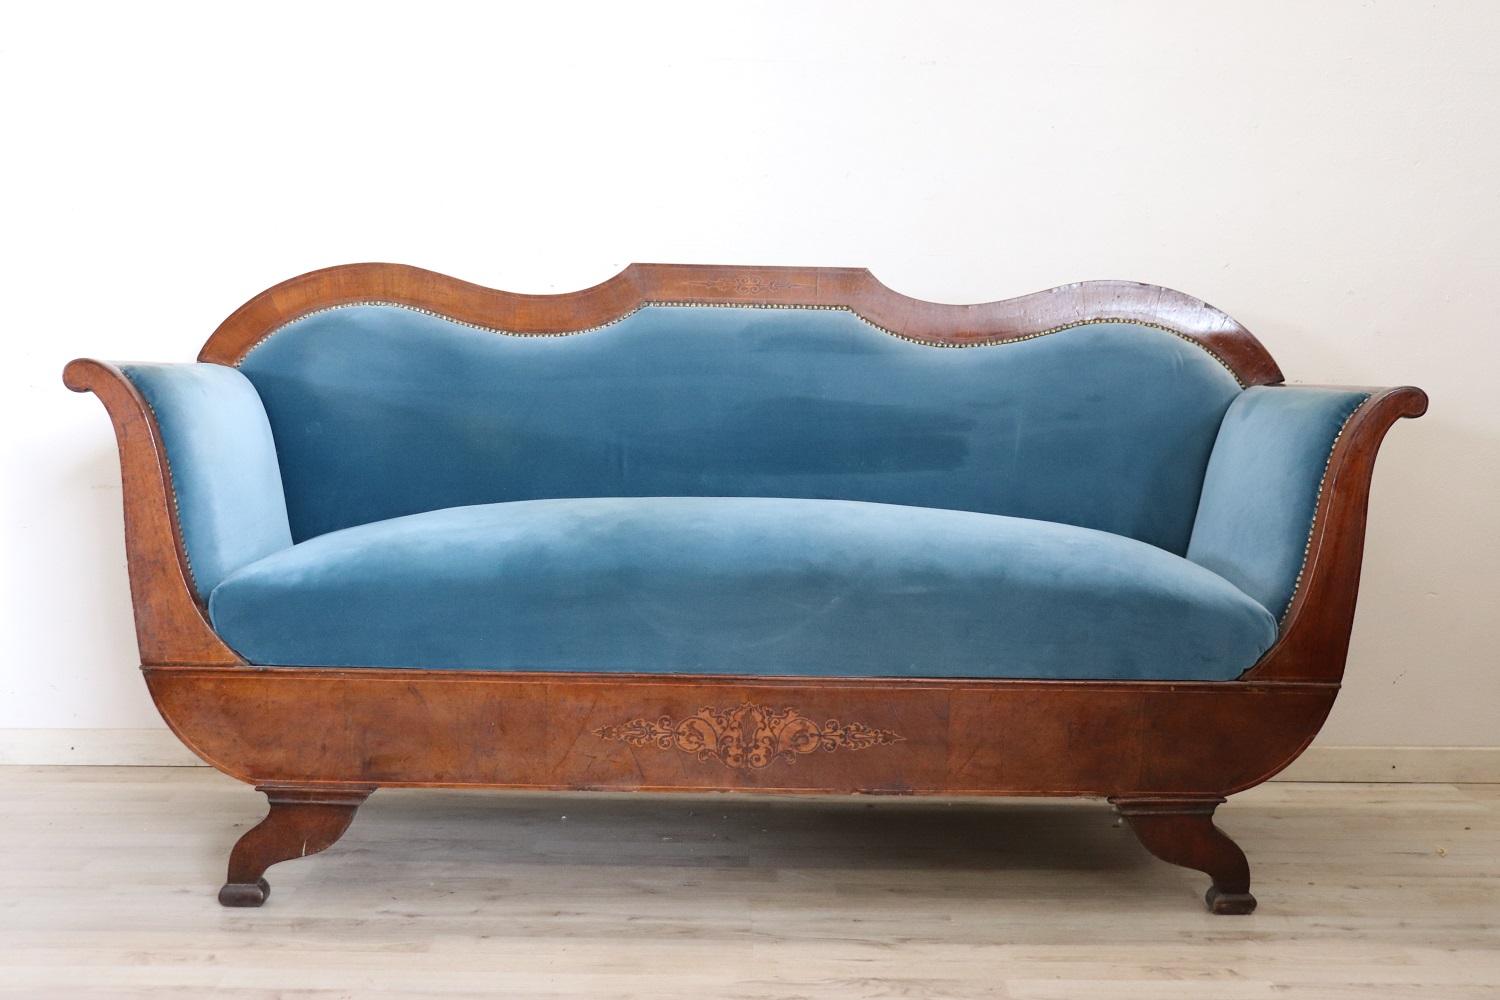 Antique settee 1825s of the period Charles X. The settee is made of solid walnut with rafined inlay decorations. Particular shape called a boat. The settee is upholstered in elegant blue velvet, perfect padding. Large size compared to other antique